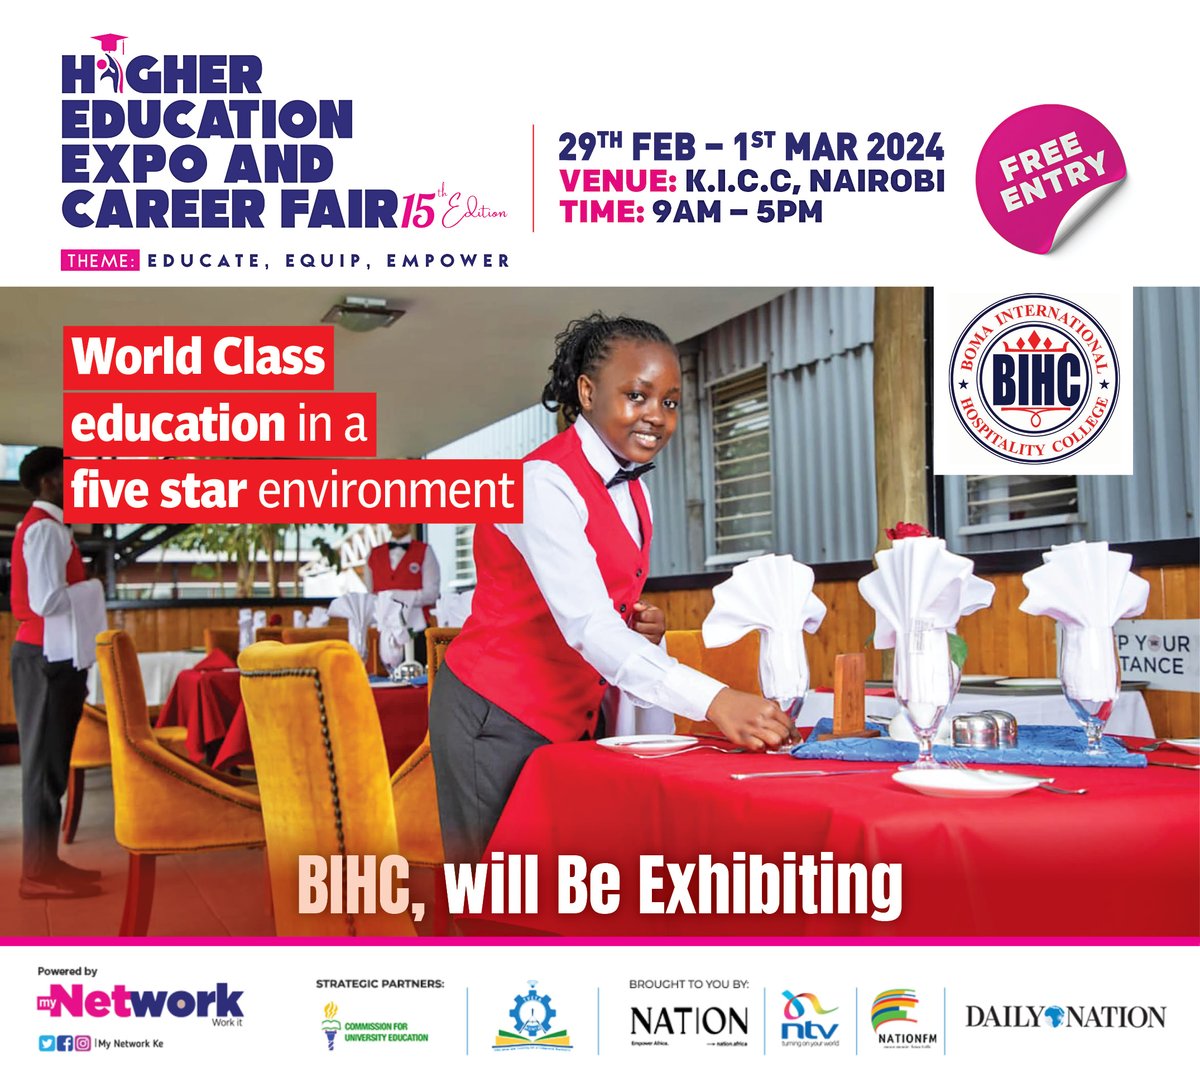 Experience World Class education in a star environment from @bomacollege at the 15th Edition of the Higher Education Expo and Career Fair. Venue: KICC Grounds. Time: 29th Feb to 1st March. Entry is FREE! #NMGCareerFair